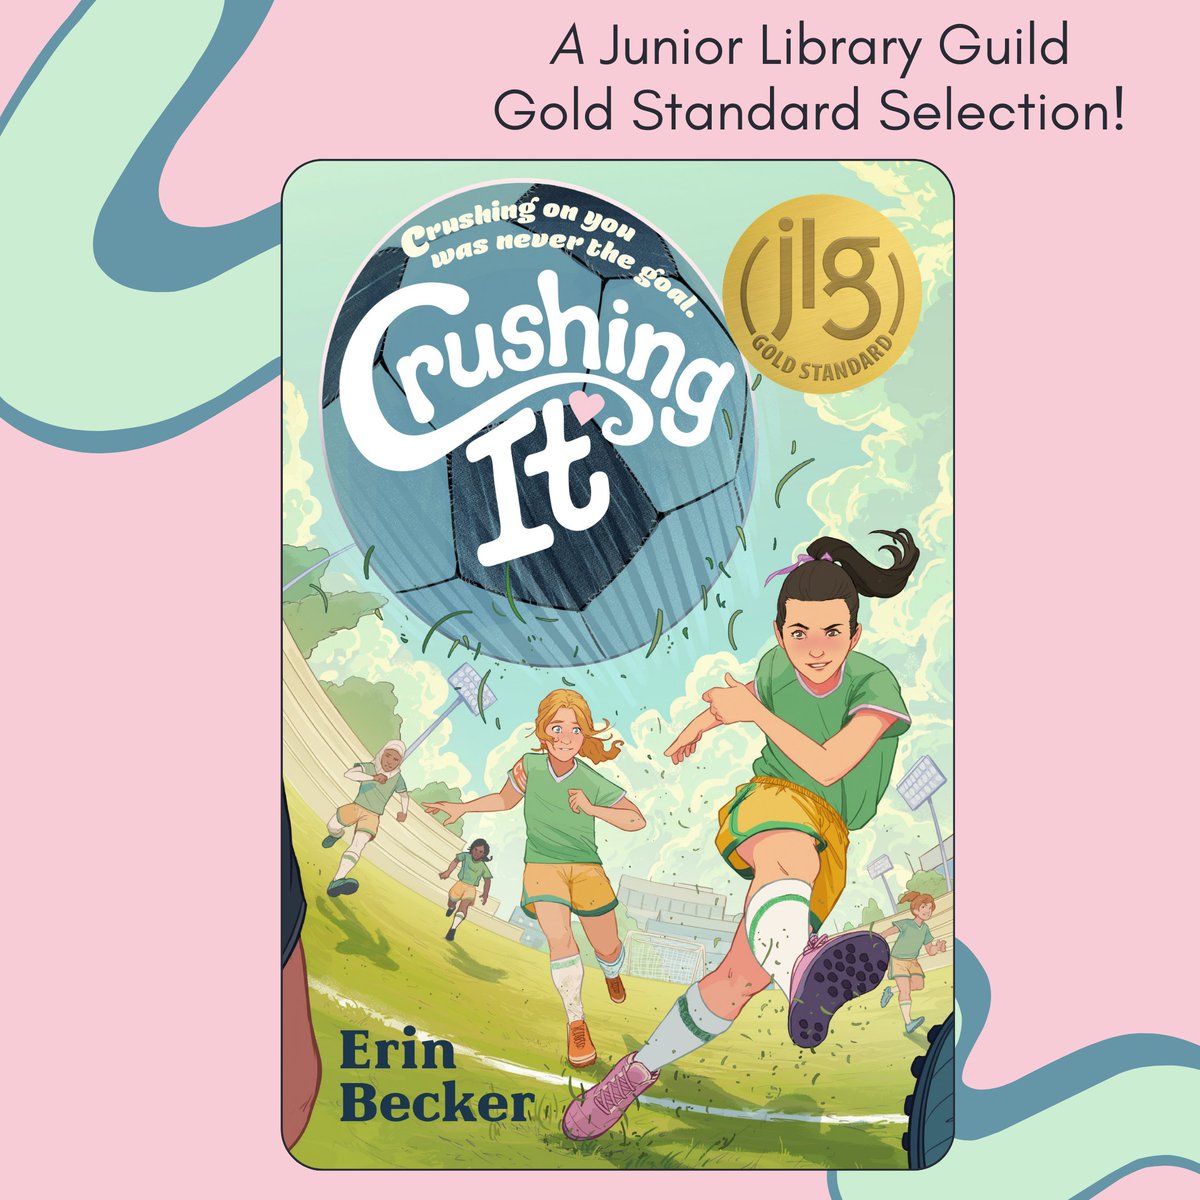 I was thrilled to find out today that CRUSHING IT, which comes out in August, is a Junior Library Guild Gold Standard selection. Libraries were such a huge part of my life growing up, and as a first-time author, this means a lot! Thank you @jrlibraryguild 💗